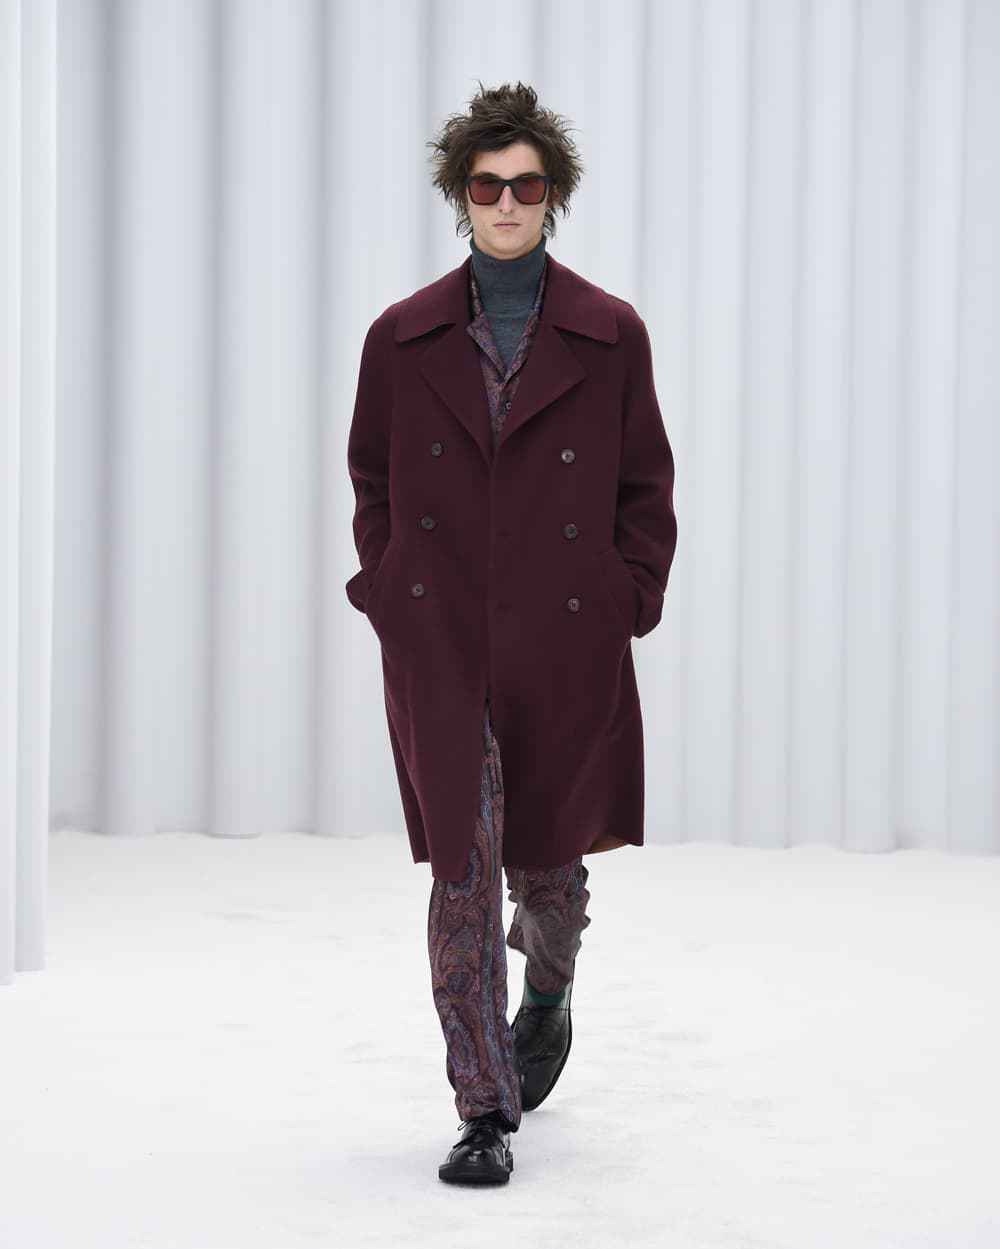 AW21 - Men's COLLECTIONS